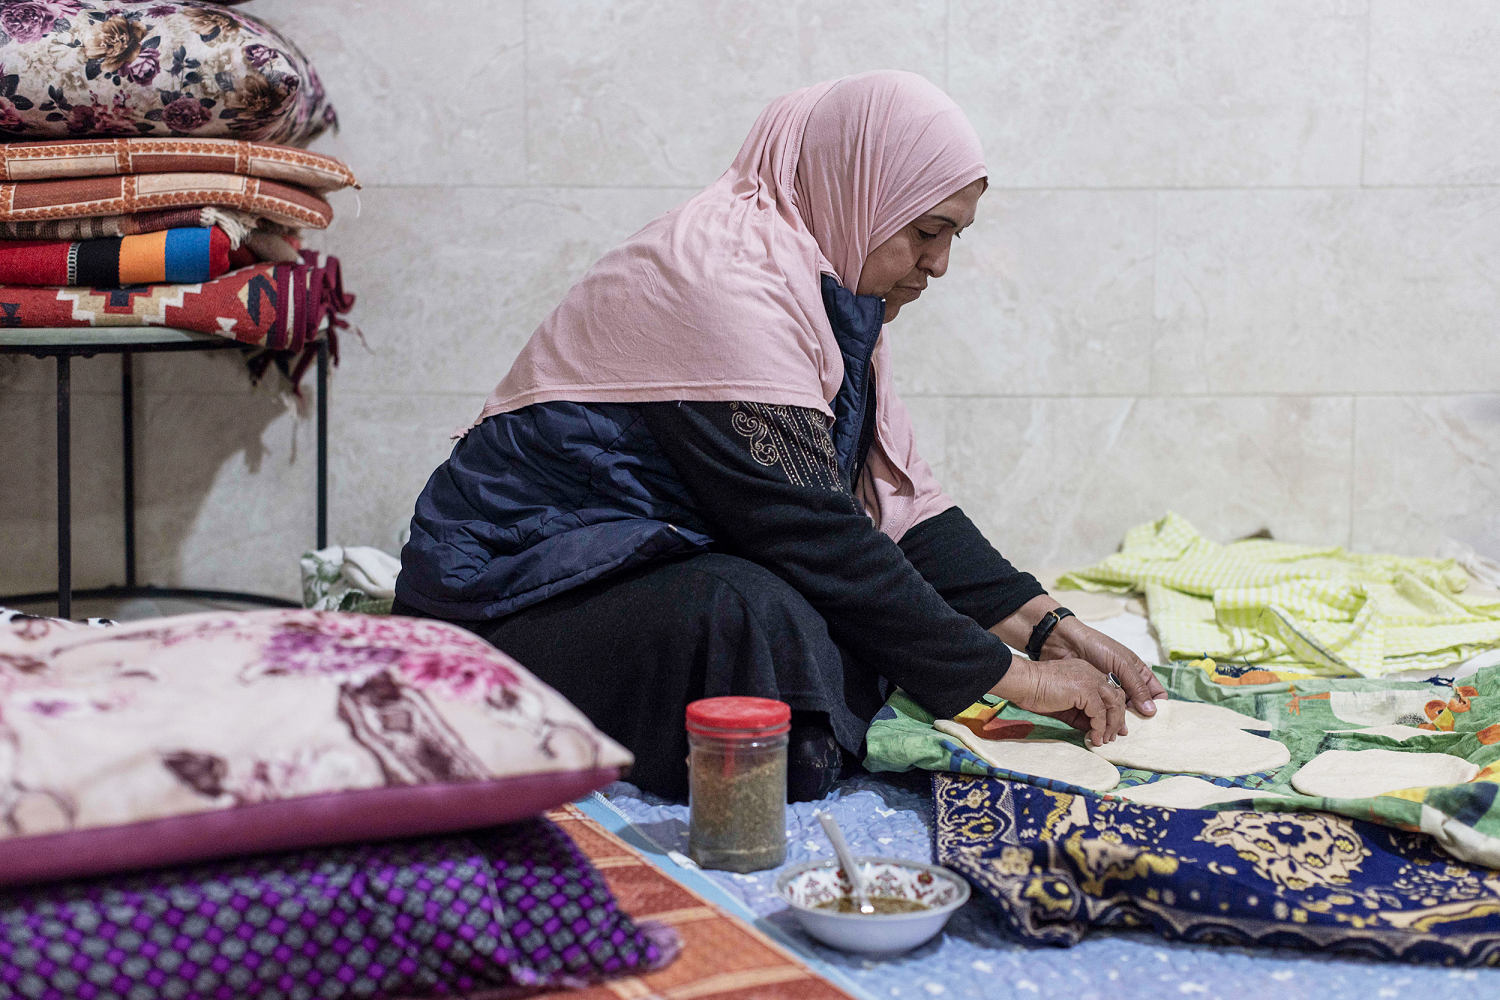 at a ramadan meal, palestinian bedouin invite jewish israelis to the table